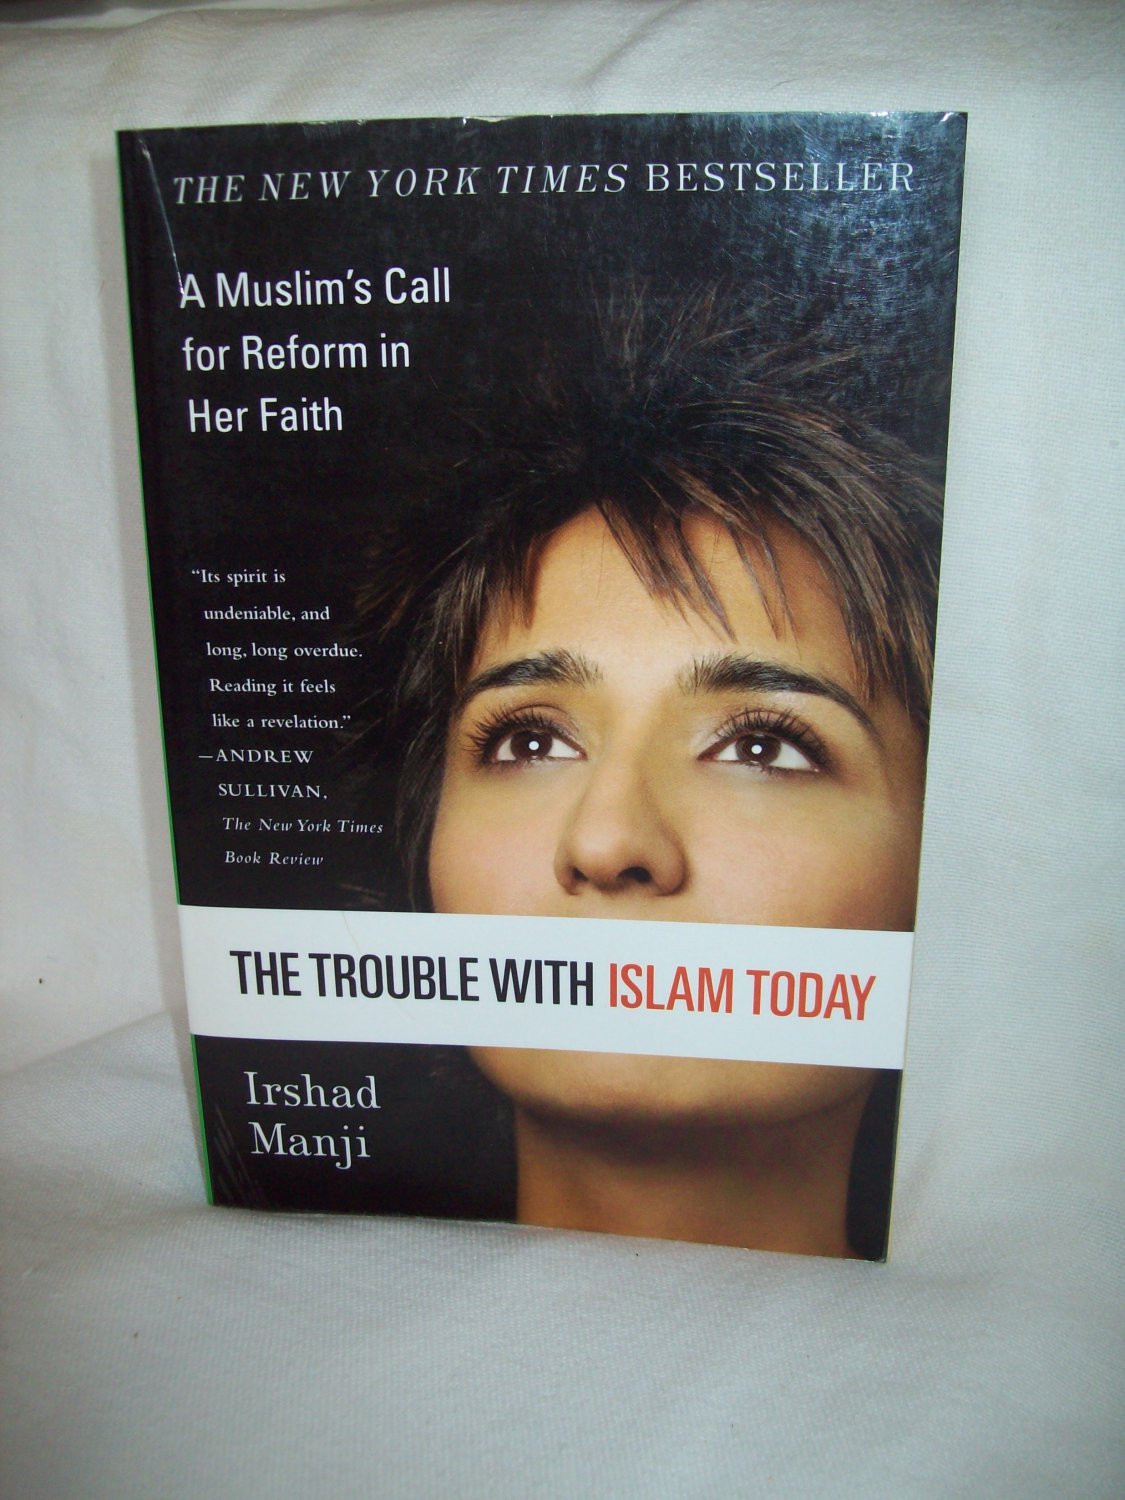 The Trouble With Islam Today by Irshad Manji